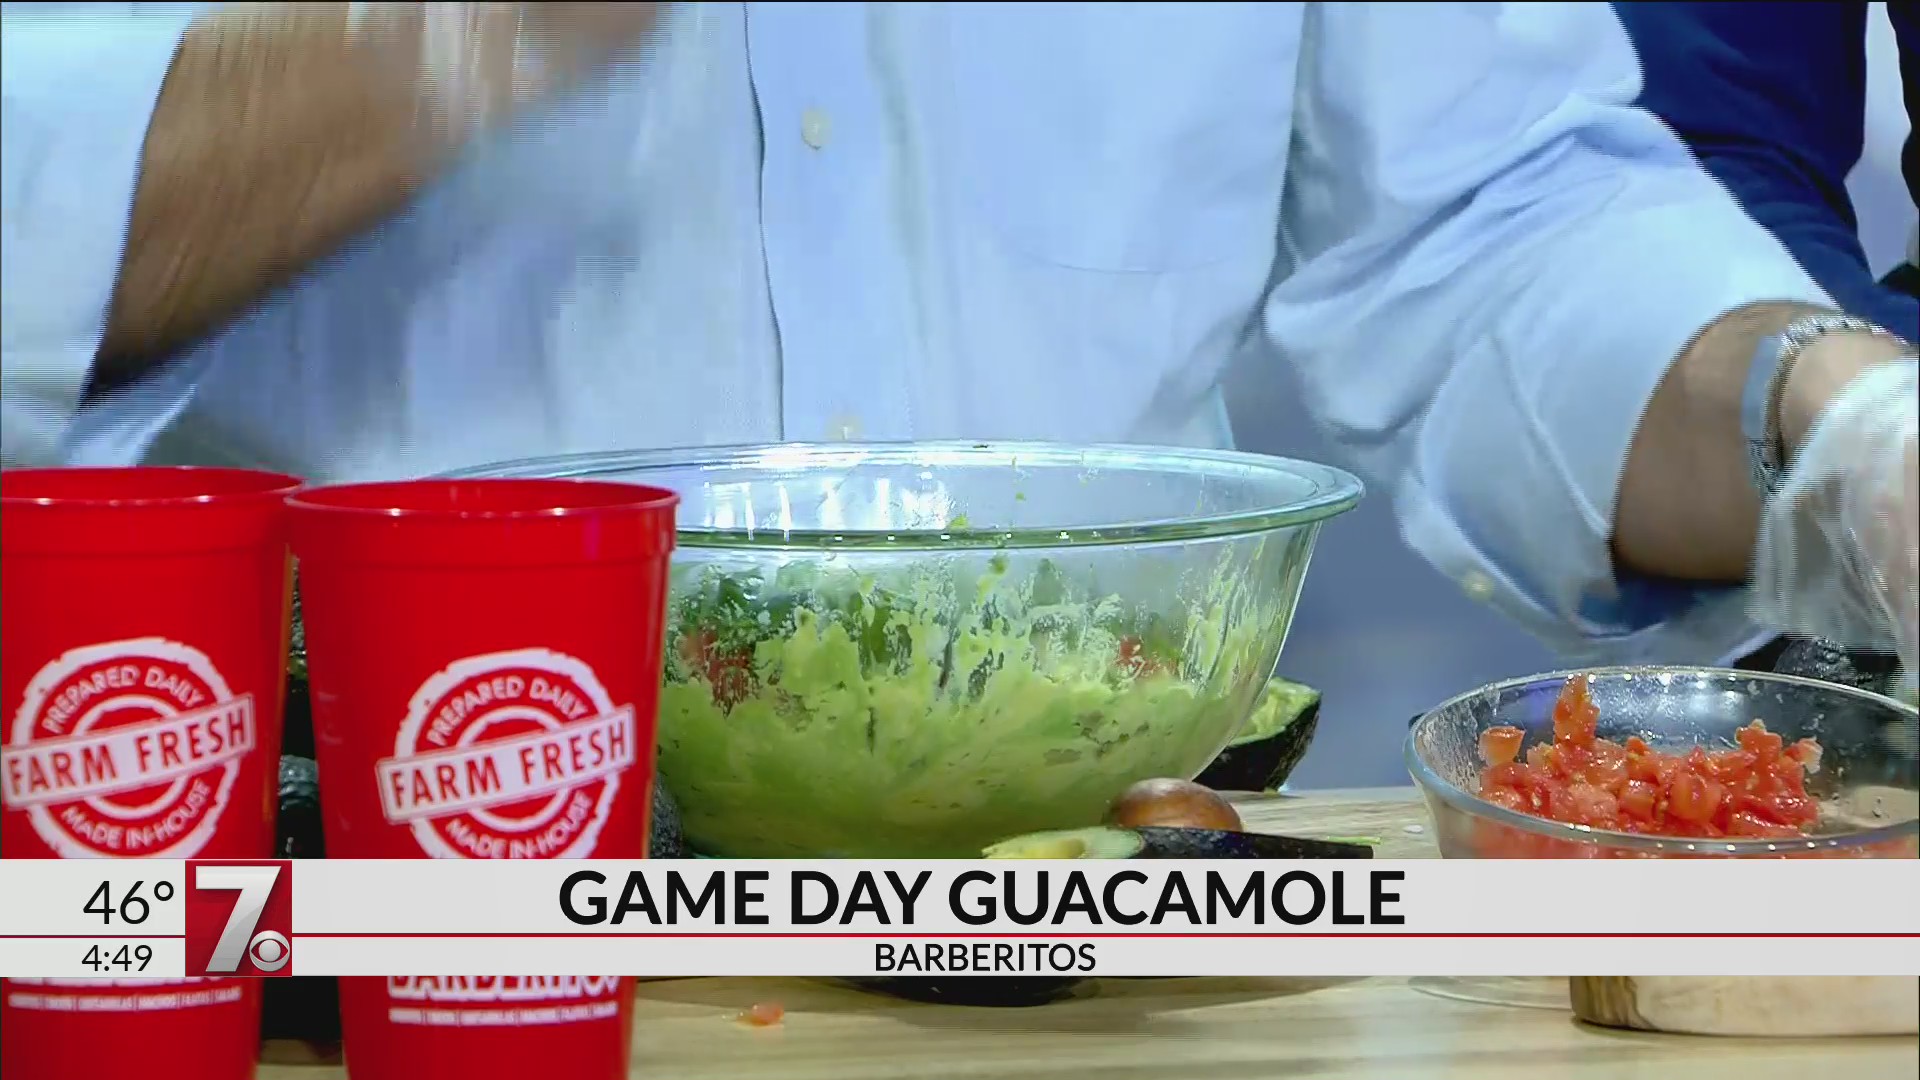 Thumbnail for the video titled "#7Food: Game Day Guacamole"